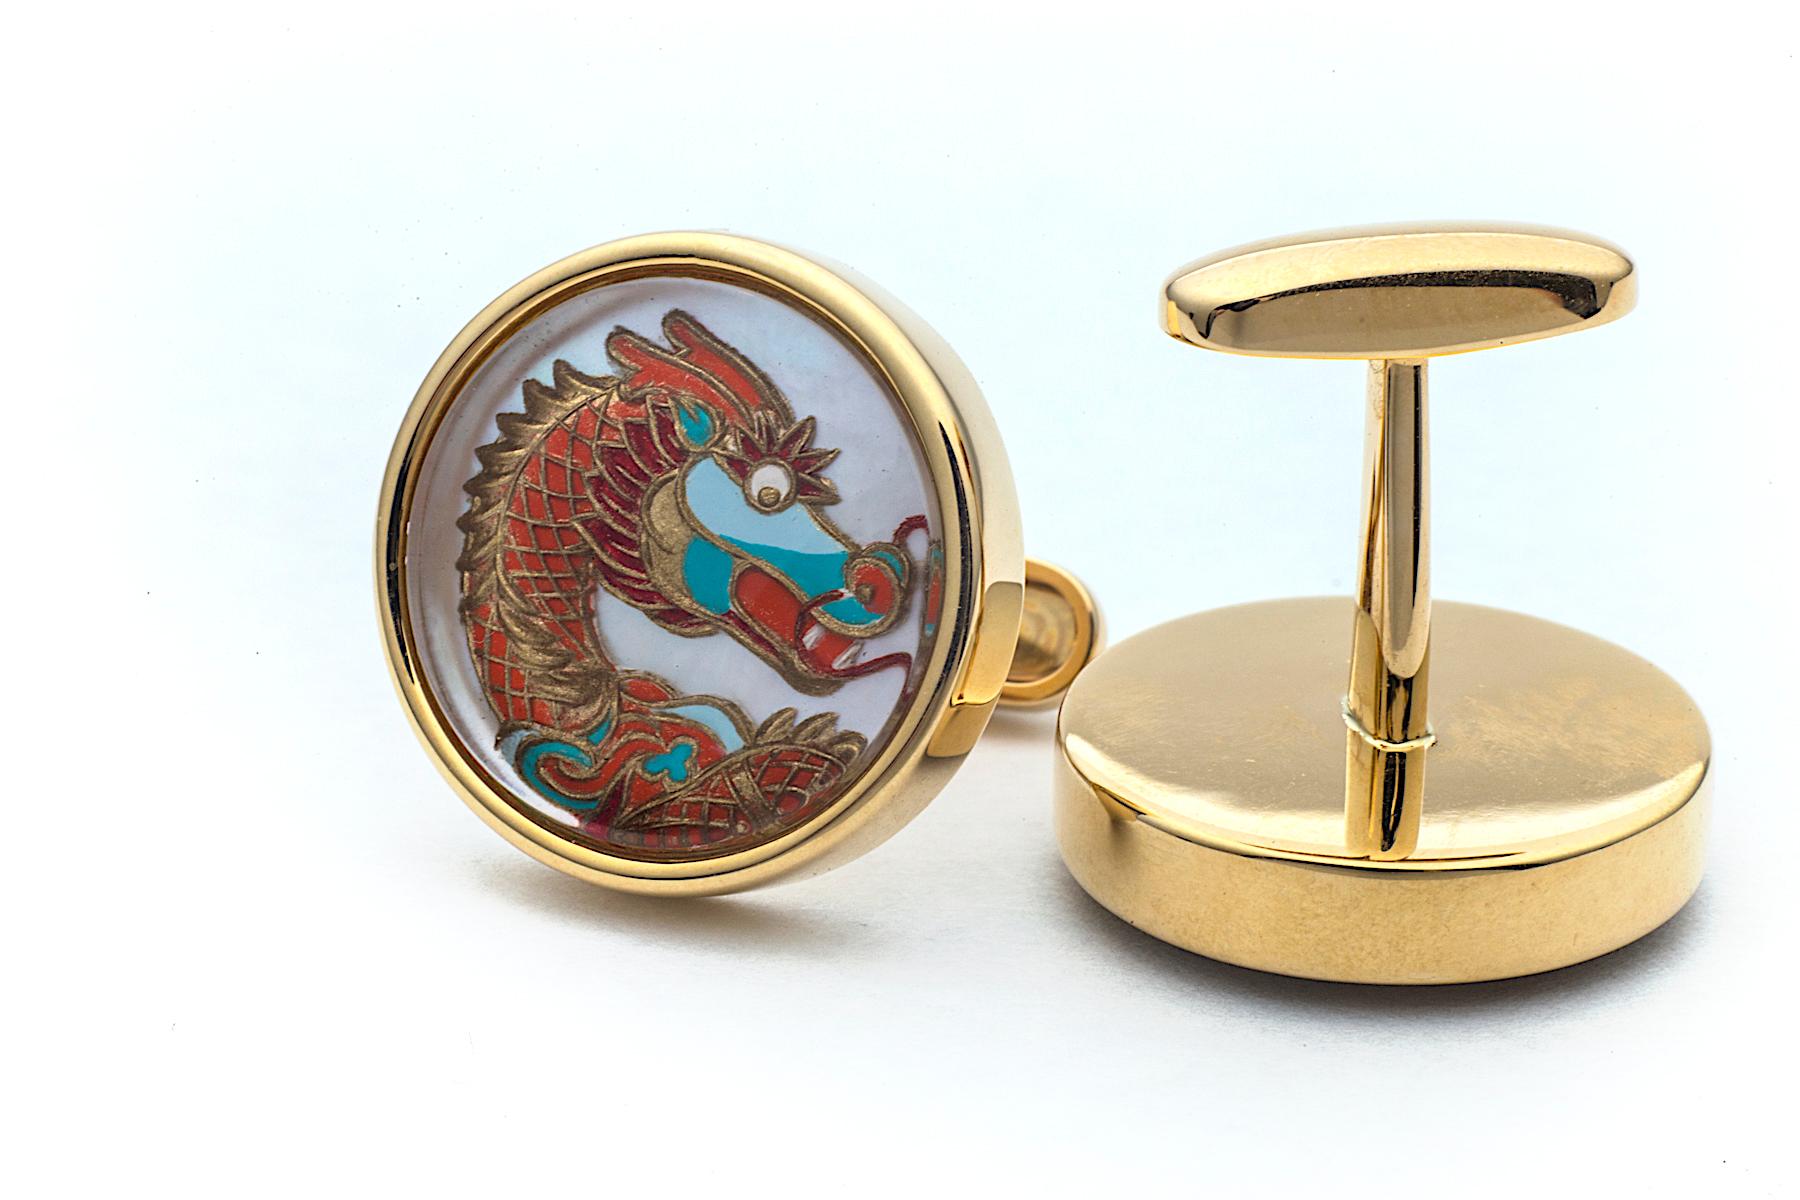 Contemporary Reverse Carved Rock Crystal and Mother-of-Pearl Dragon Cufflinks